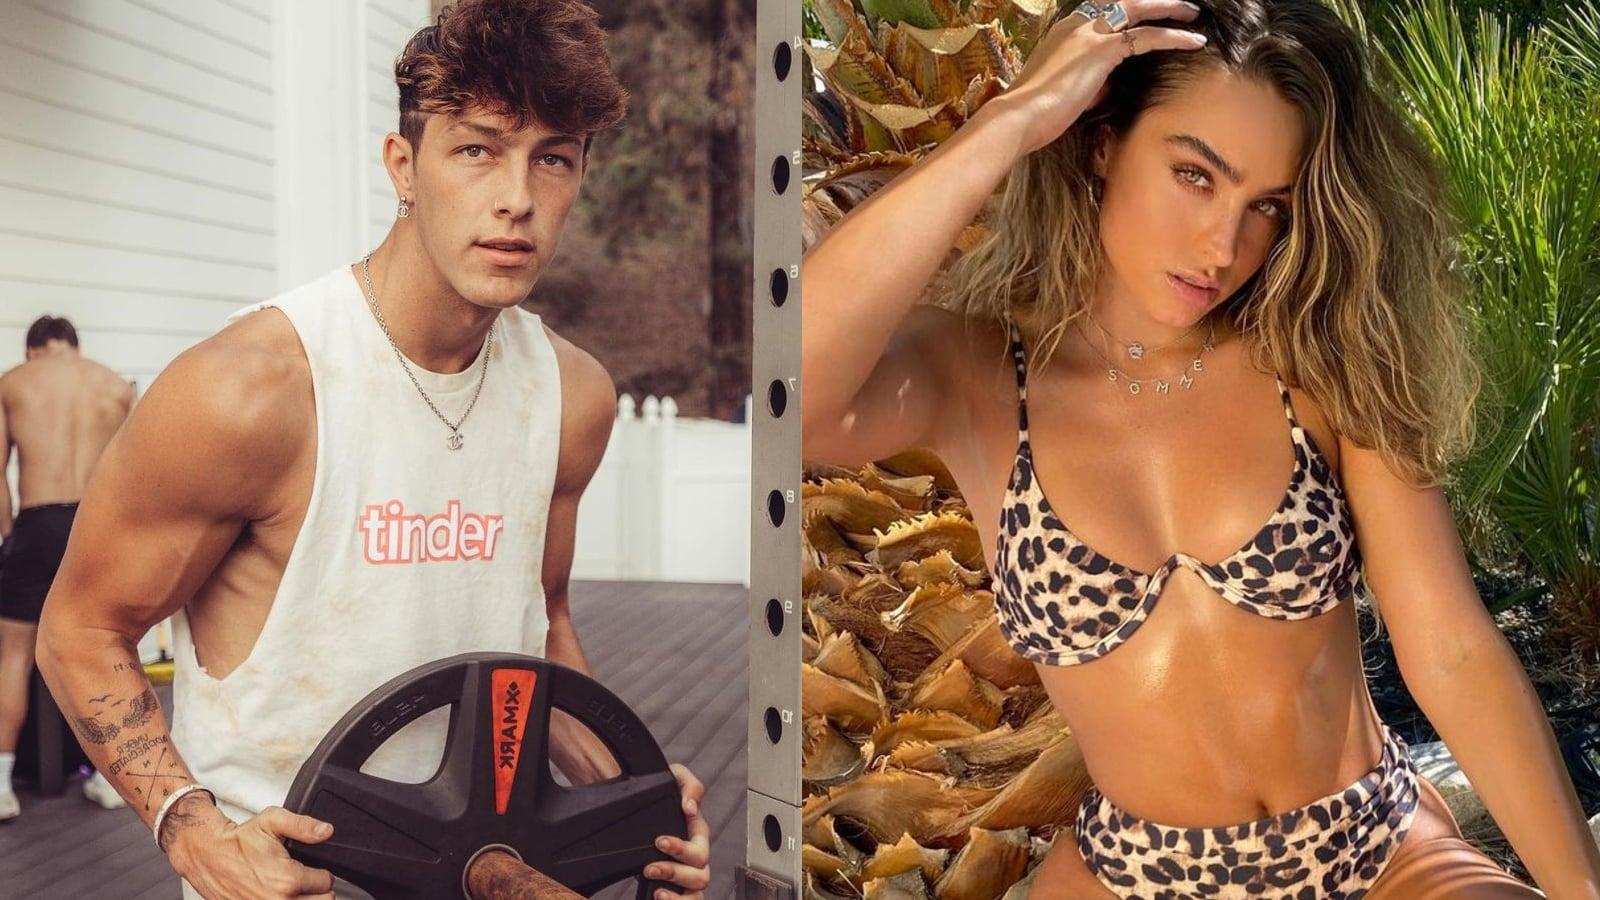 sommer ray and tayler holder super toxic relationship